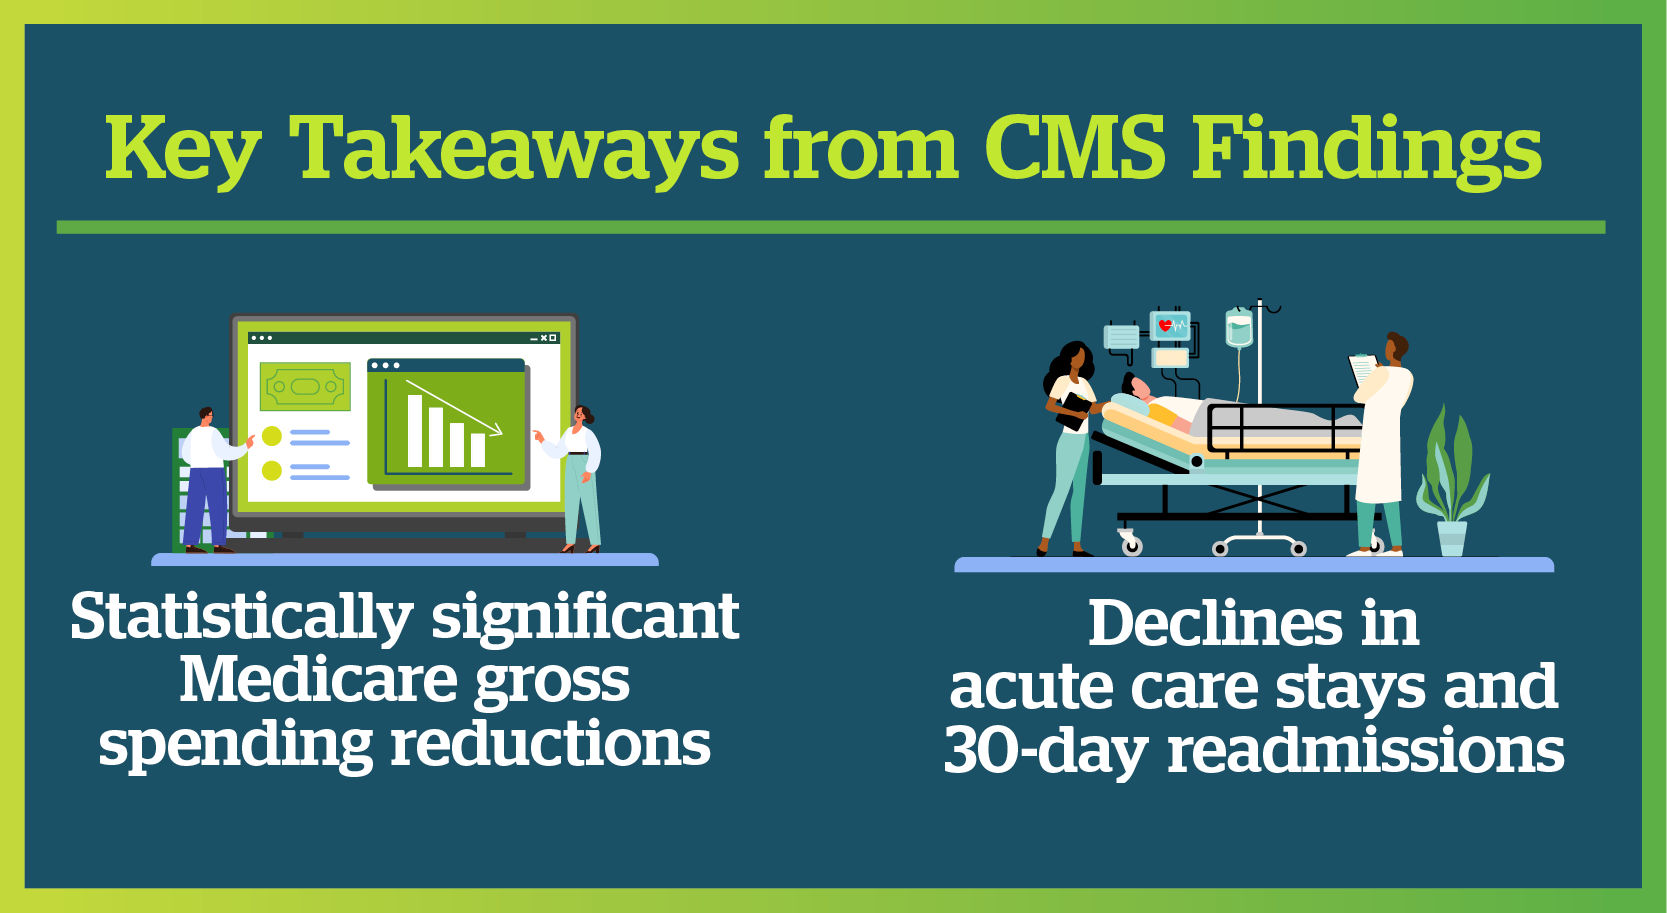 Graphic - Key Takeaways from CMS findings. First, statistically significant Medicare gross spending reductions - with a little illustration of providers looking at a computer with a simple bar chart indicating decreasing costs. Second, declines in acute care stays and 30-day readmissions, with a little icon of health care providers looking after a patient in a hospital bed. 